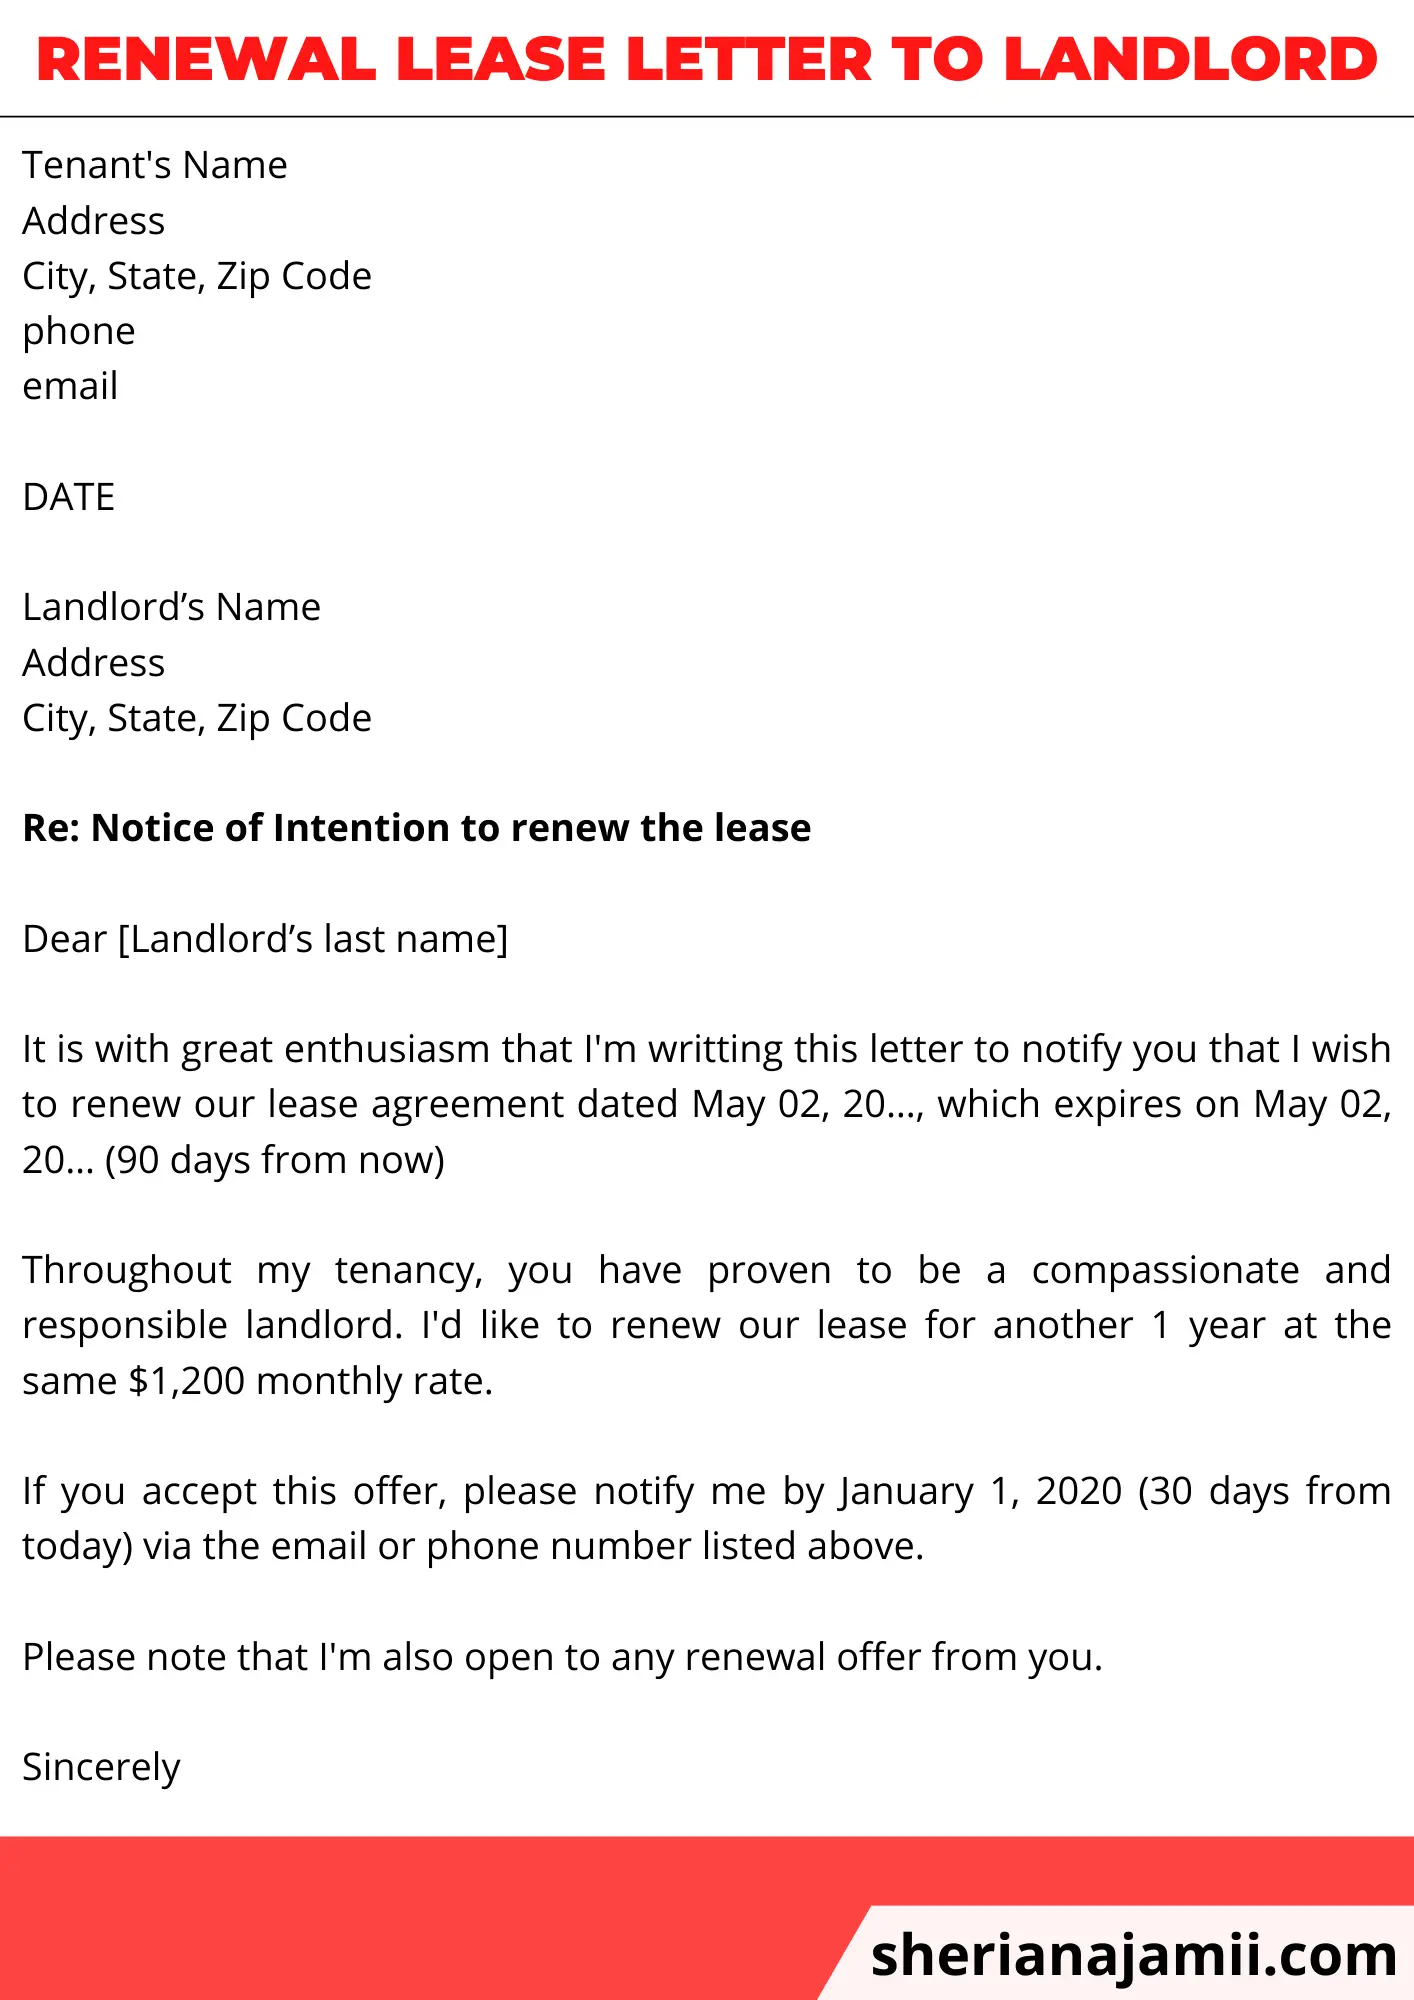 Renewal lease letter to landlord, Renewal lease letter to landlord sample, lease renewal letter to landlord